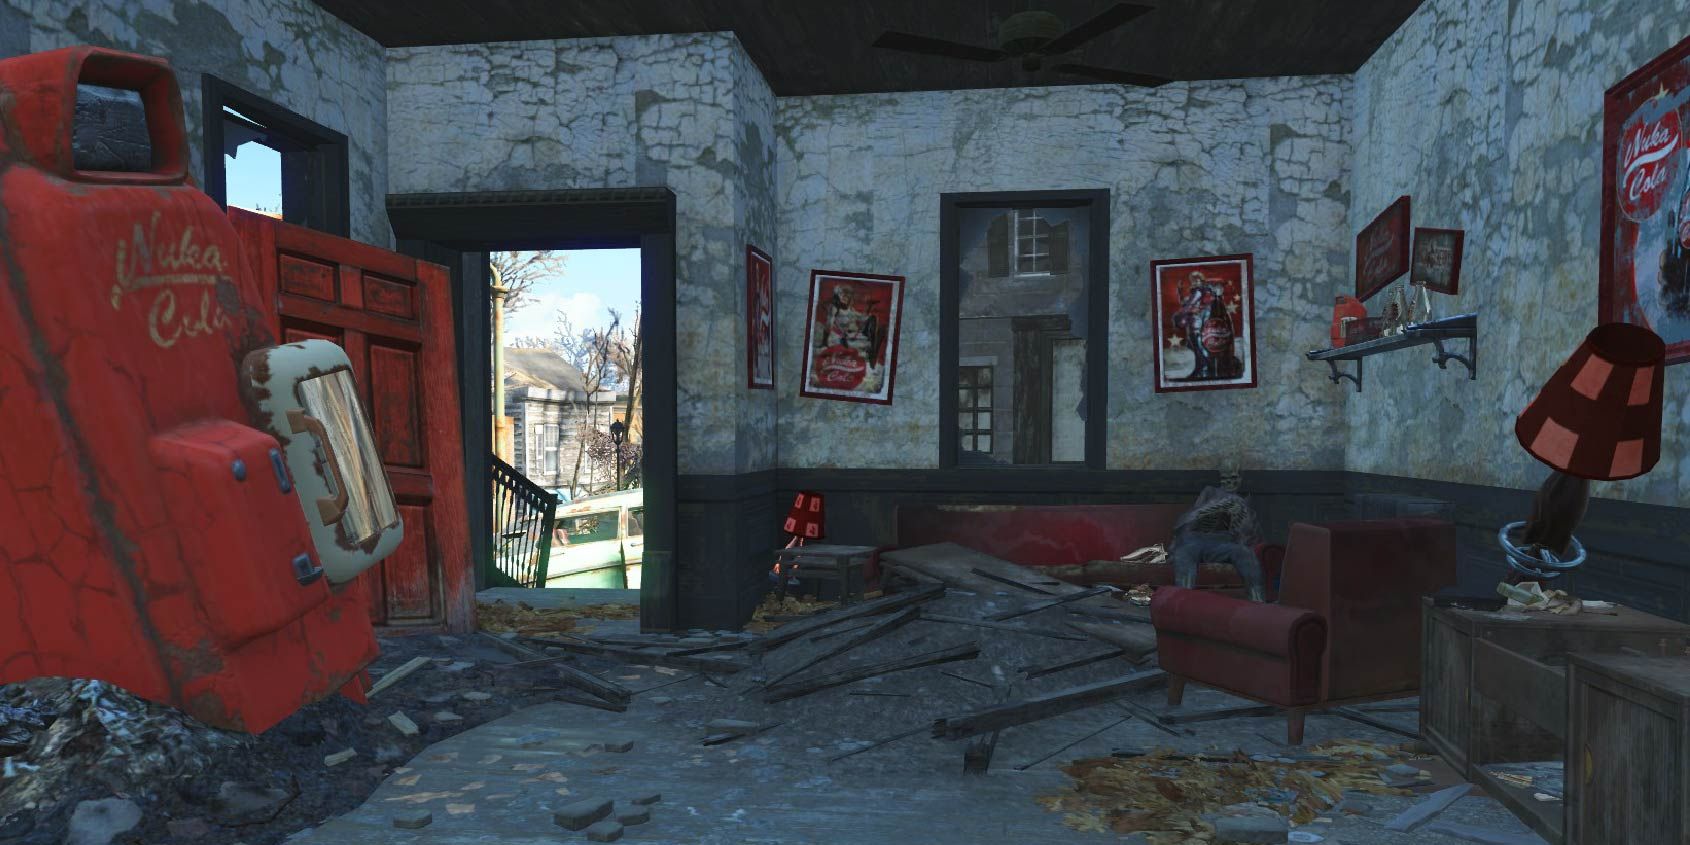 The interior of a house in the Commonwealth, filled with Nuka Cola memorabilia.